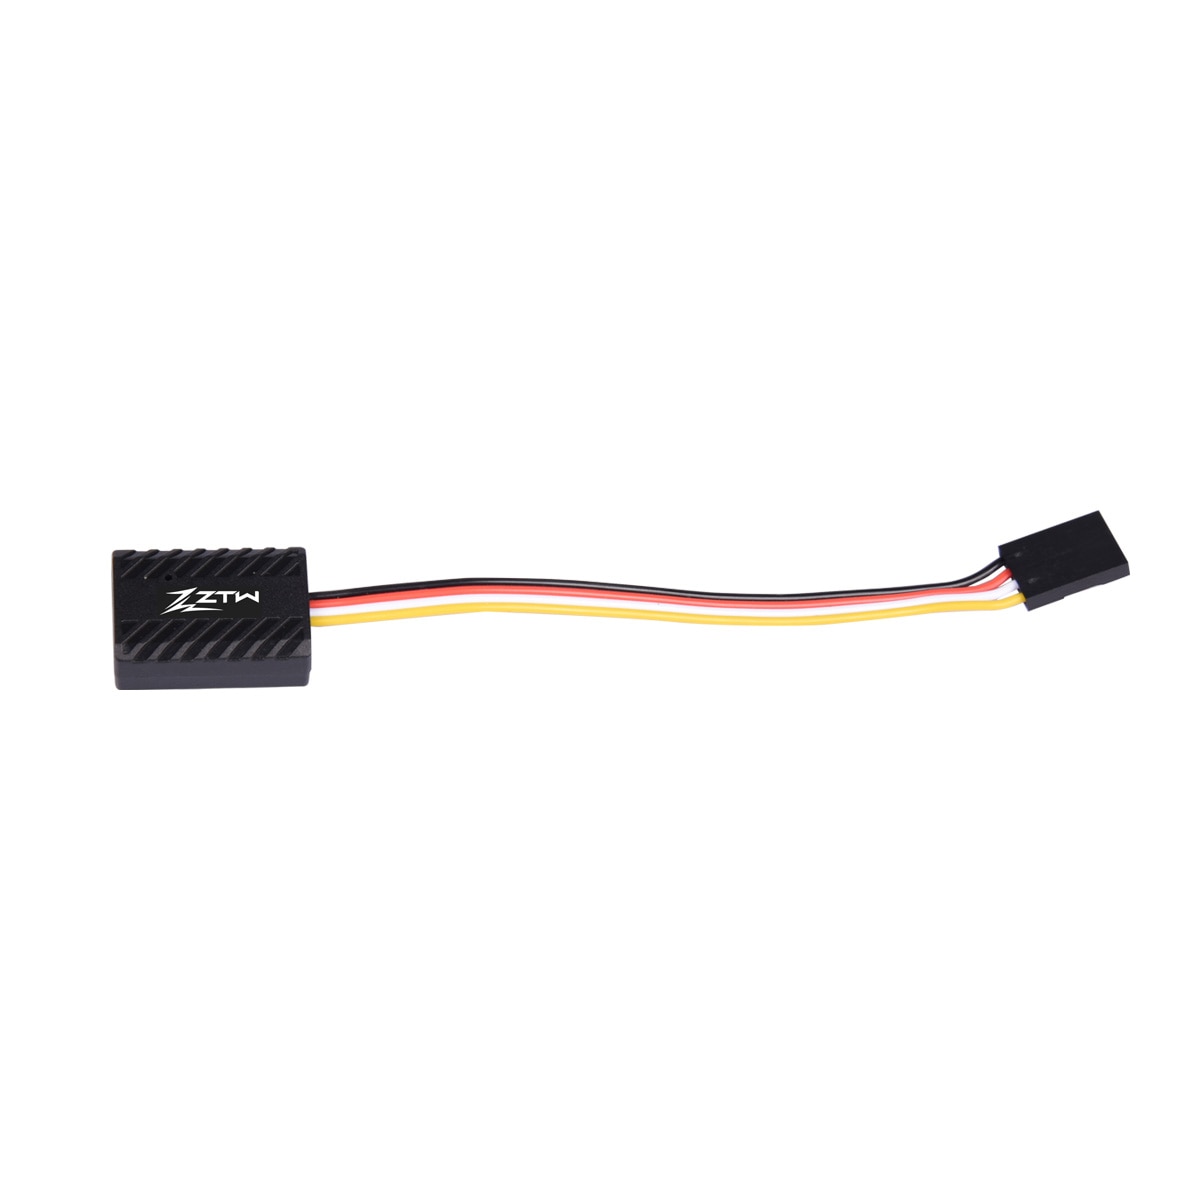 ZTW 32-Bit Skyhawk 130A/160A Telemetry ESC - HV 6-14S 6/7.4/8.4V 10A SBEC Speed Control For RC Airplane F3A F3C 550-700 Helicopter